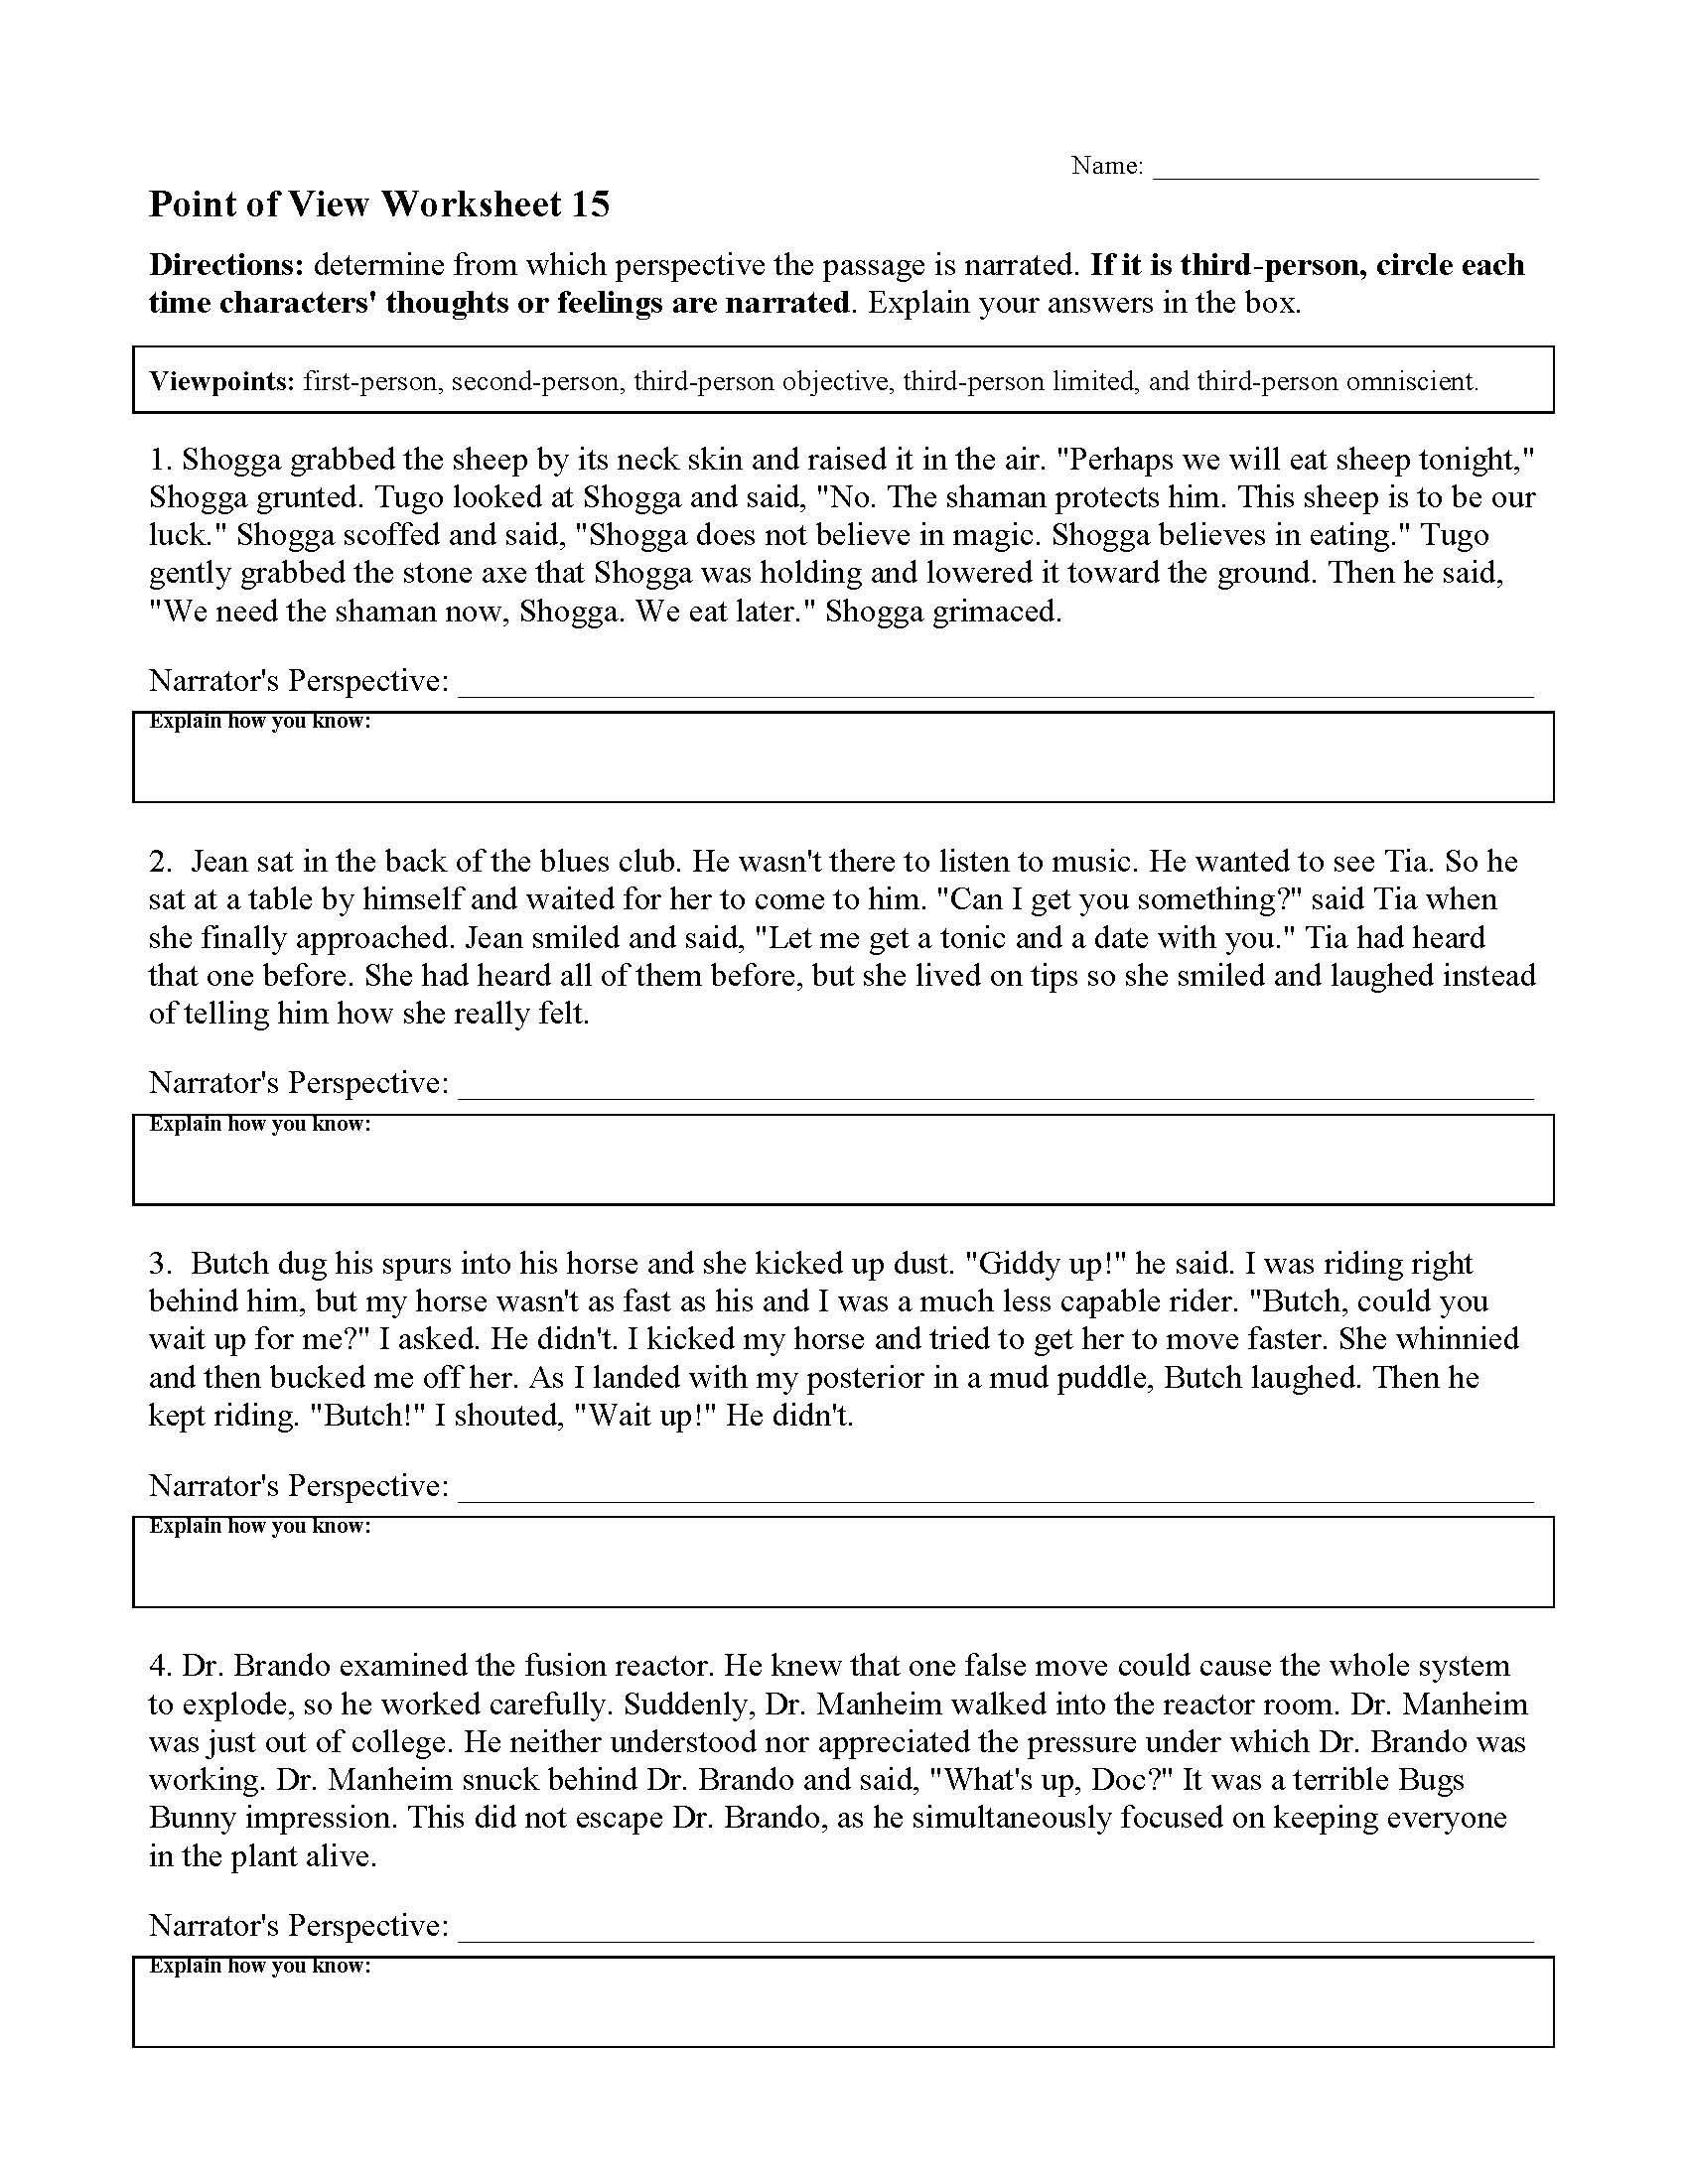 point-of-view-worksheet-1-preview